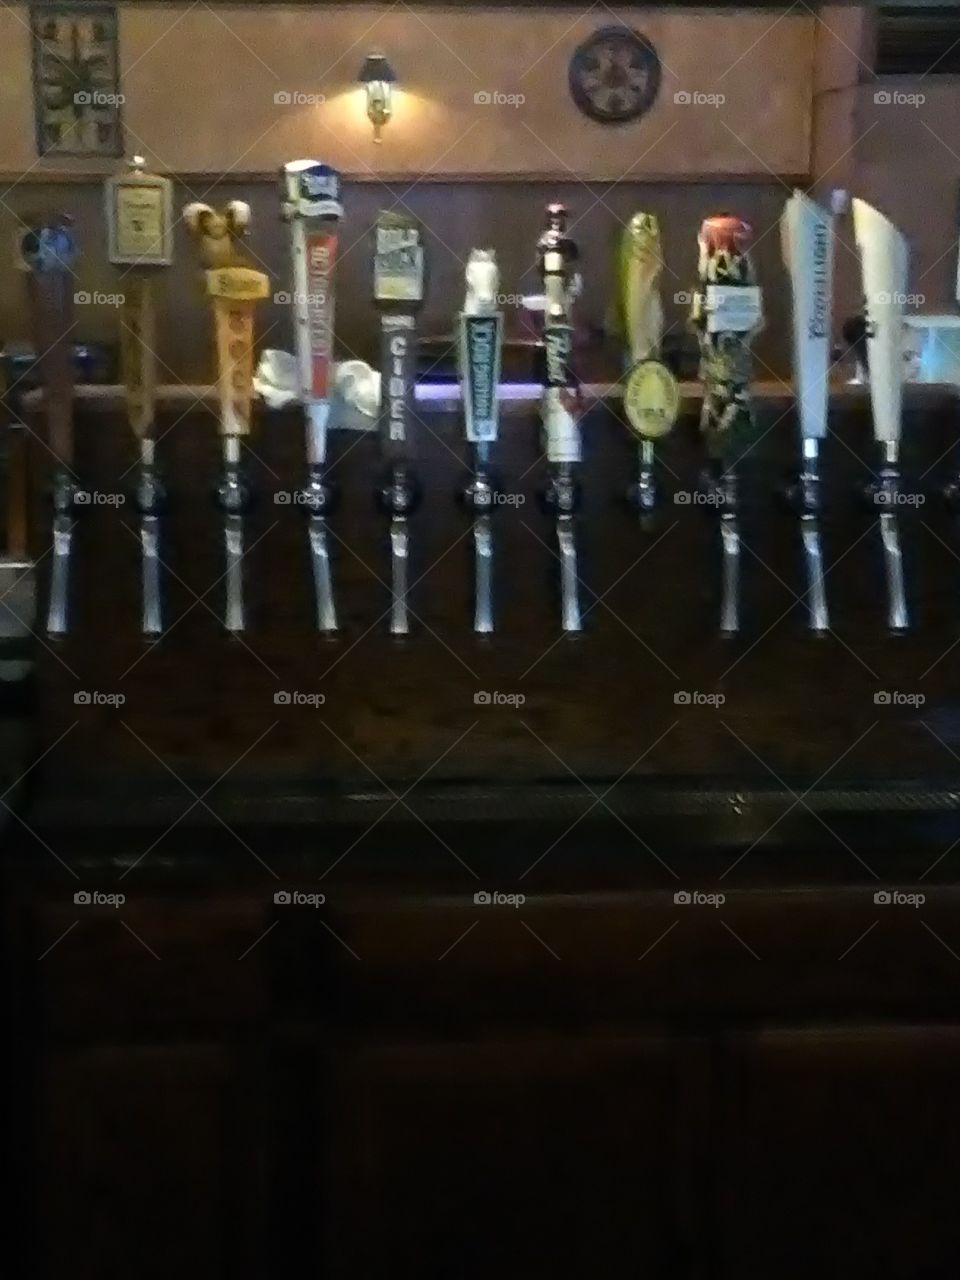 I find it funny how the bar Tap handles haven't changed much over the years.